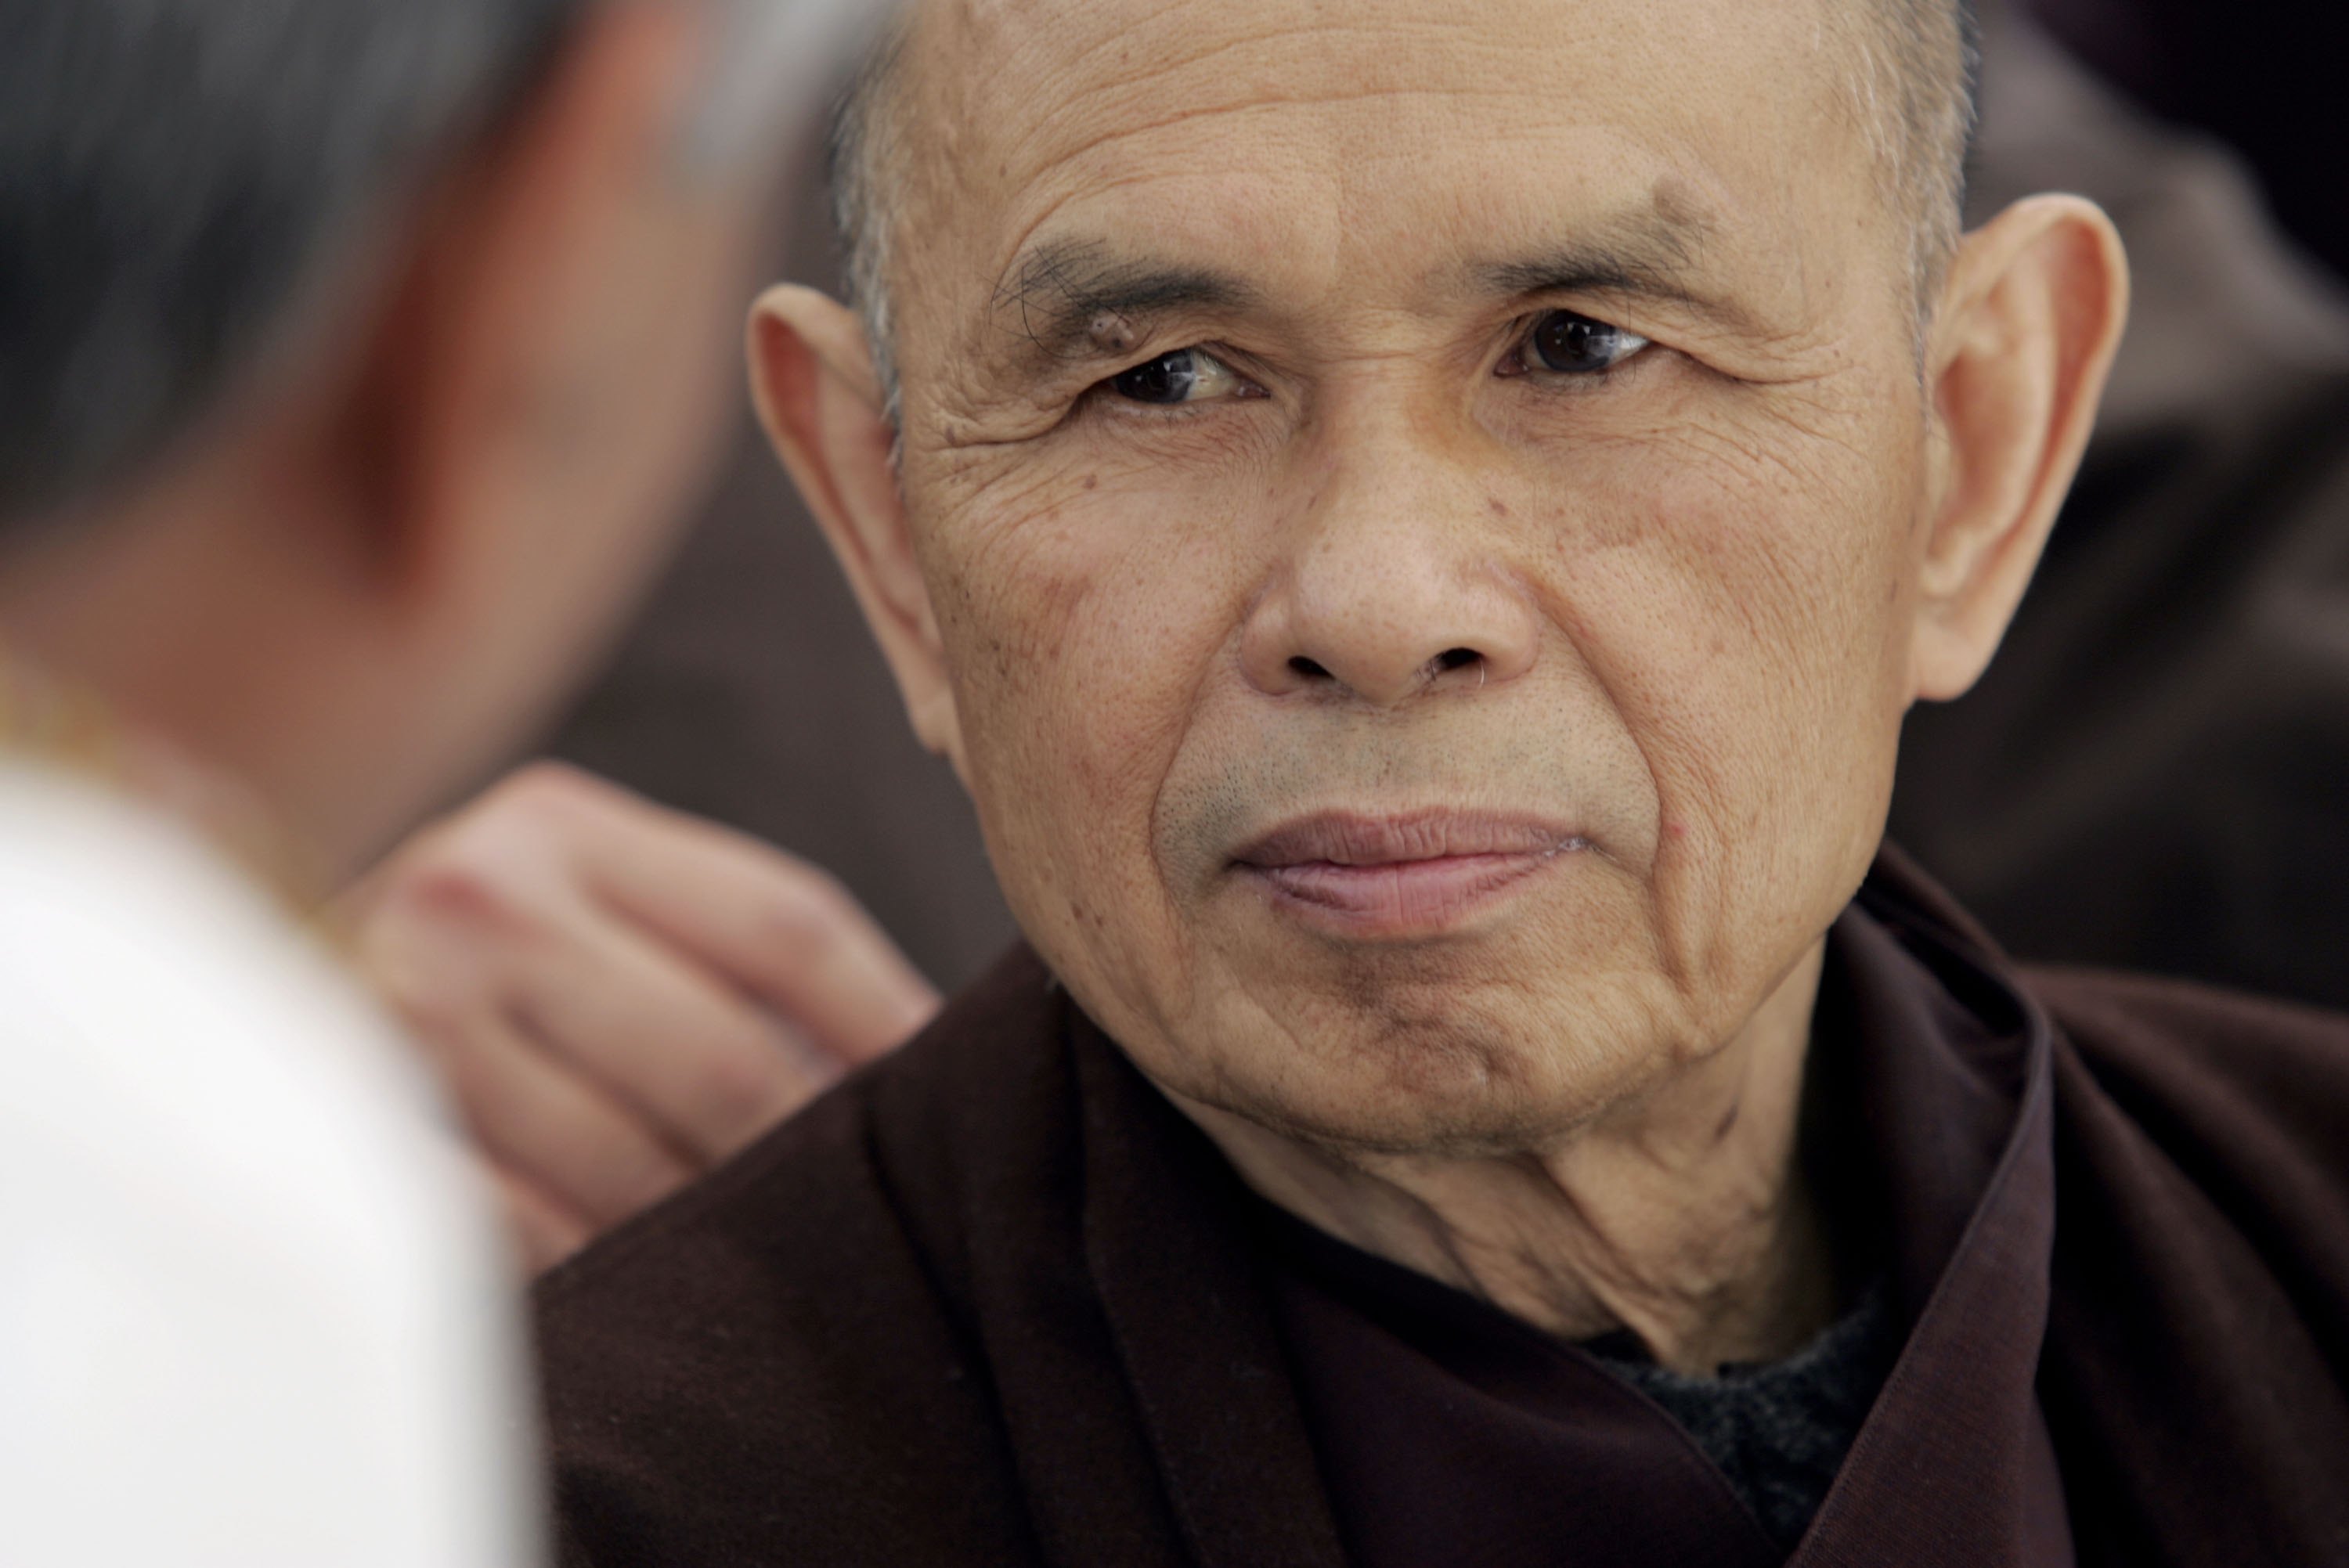 Thich Nhat Hanh, monk who taught mindfulness to West, mourned by millions